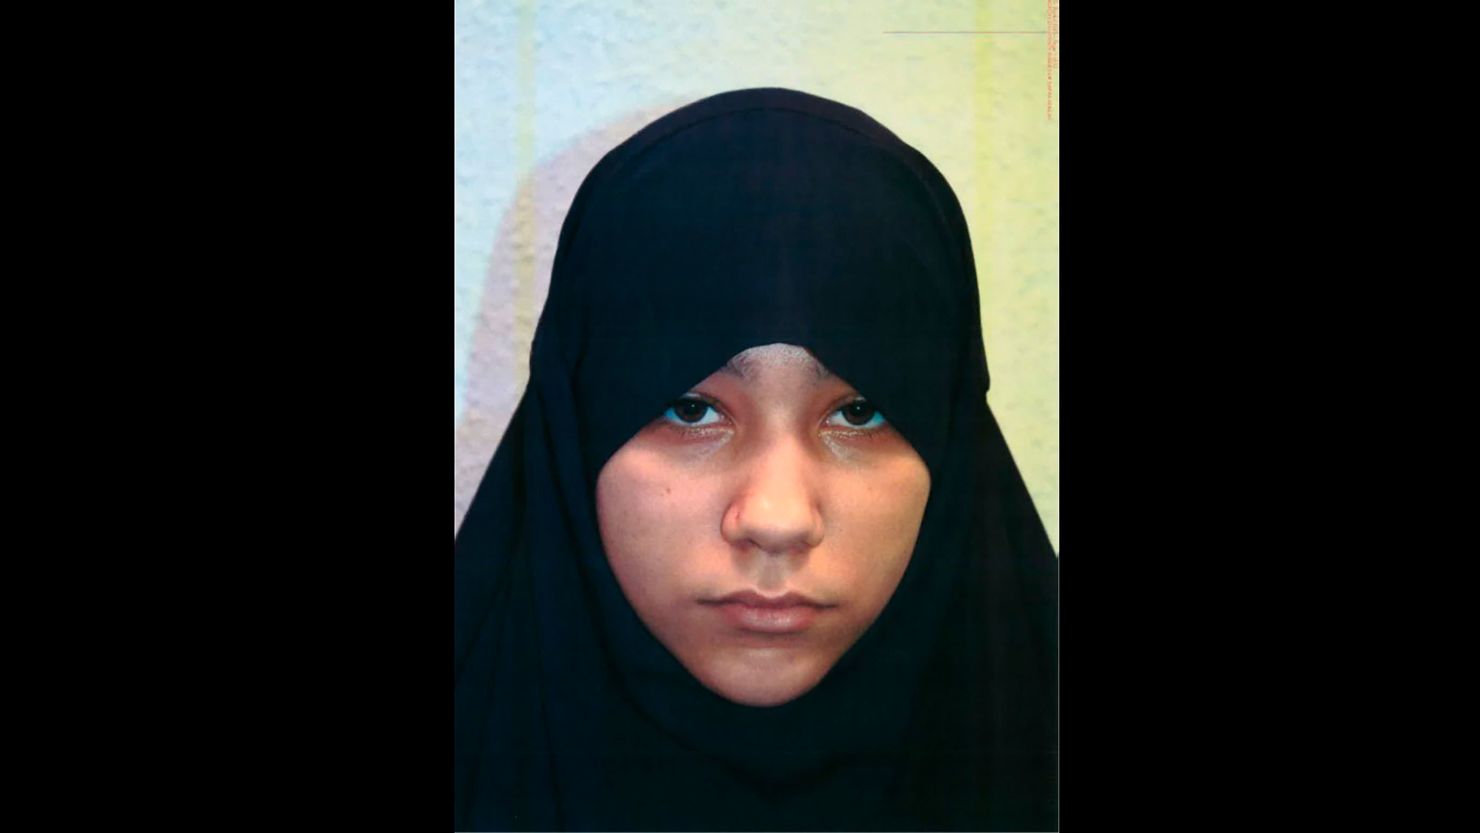 Safaa Boular was convicted of plotting an attack on the British Museum in London.